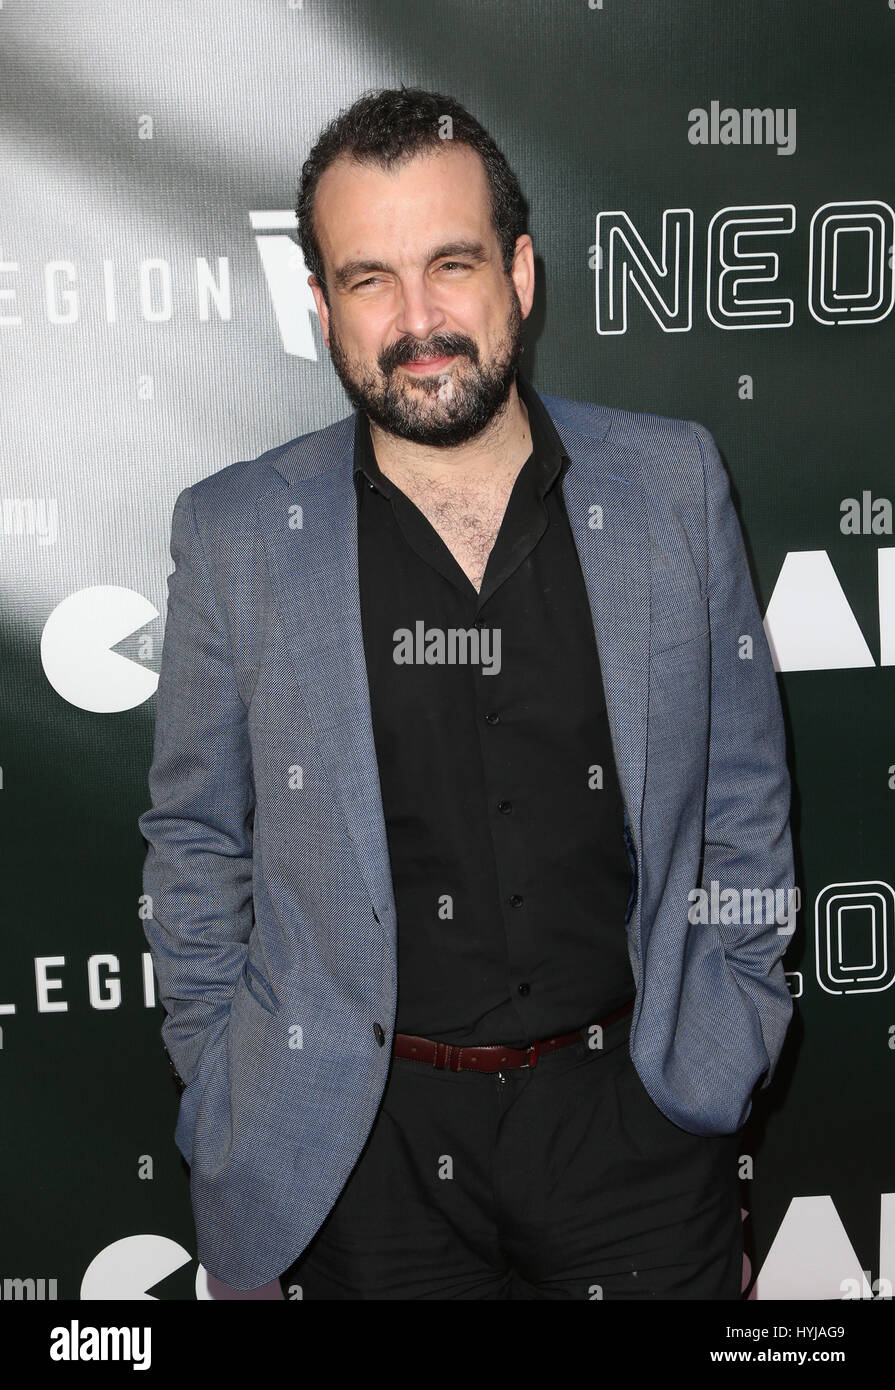 Los Angeles, Ca, USA. 04th Apr, 2017. Nacho Vigalondo, At Premiere Of Neon's 'Colossal' At The Vista Theatre In California on April 04, 2017. Credit: Fs/Media Punch/Alamy Live News Stock Photo